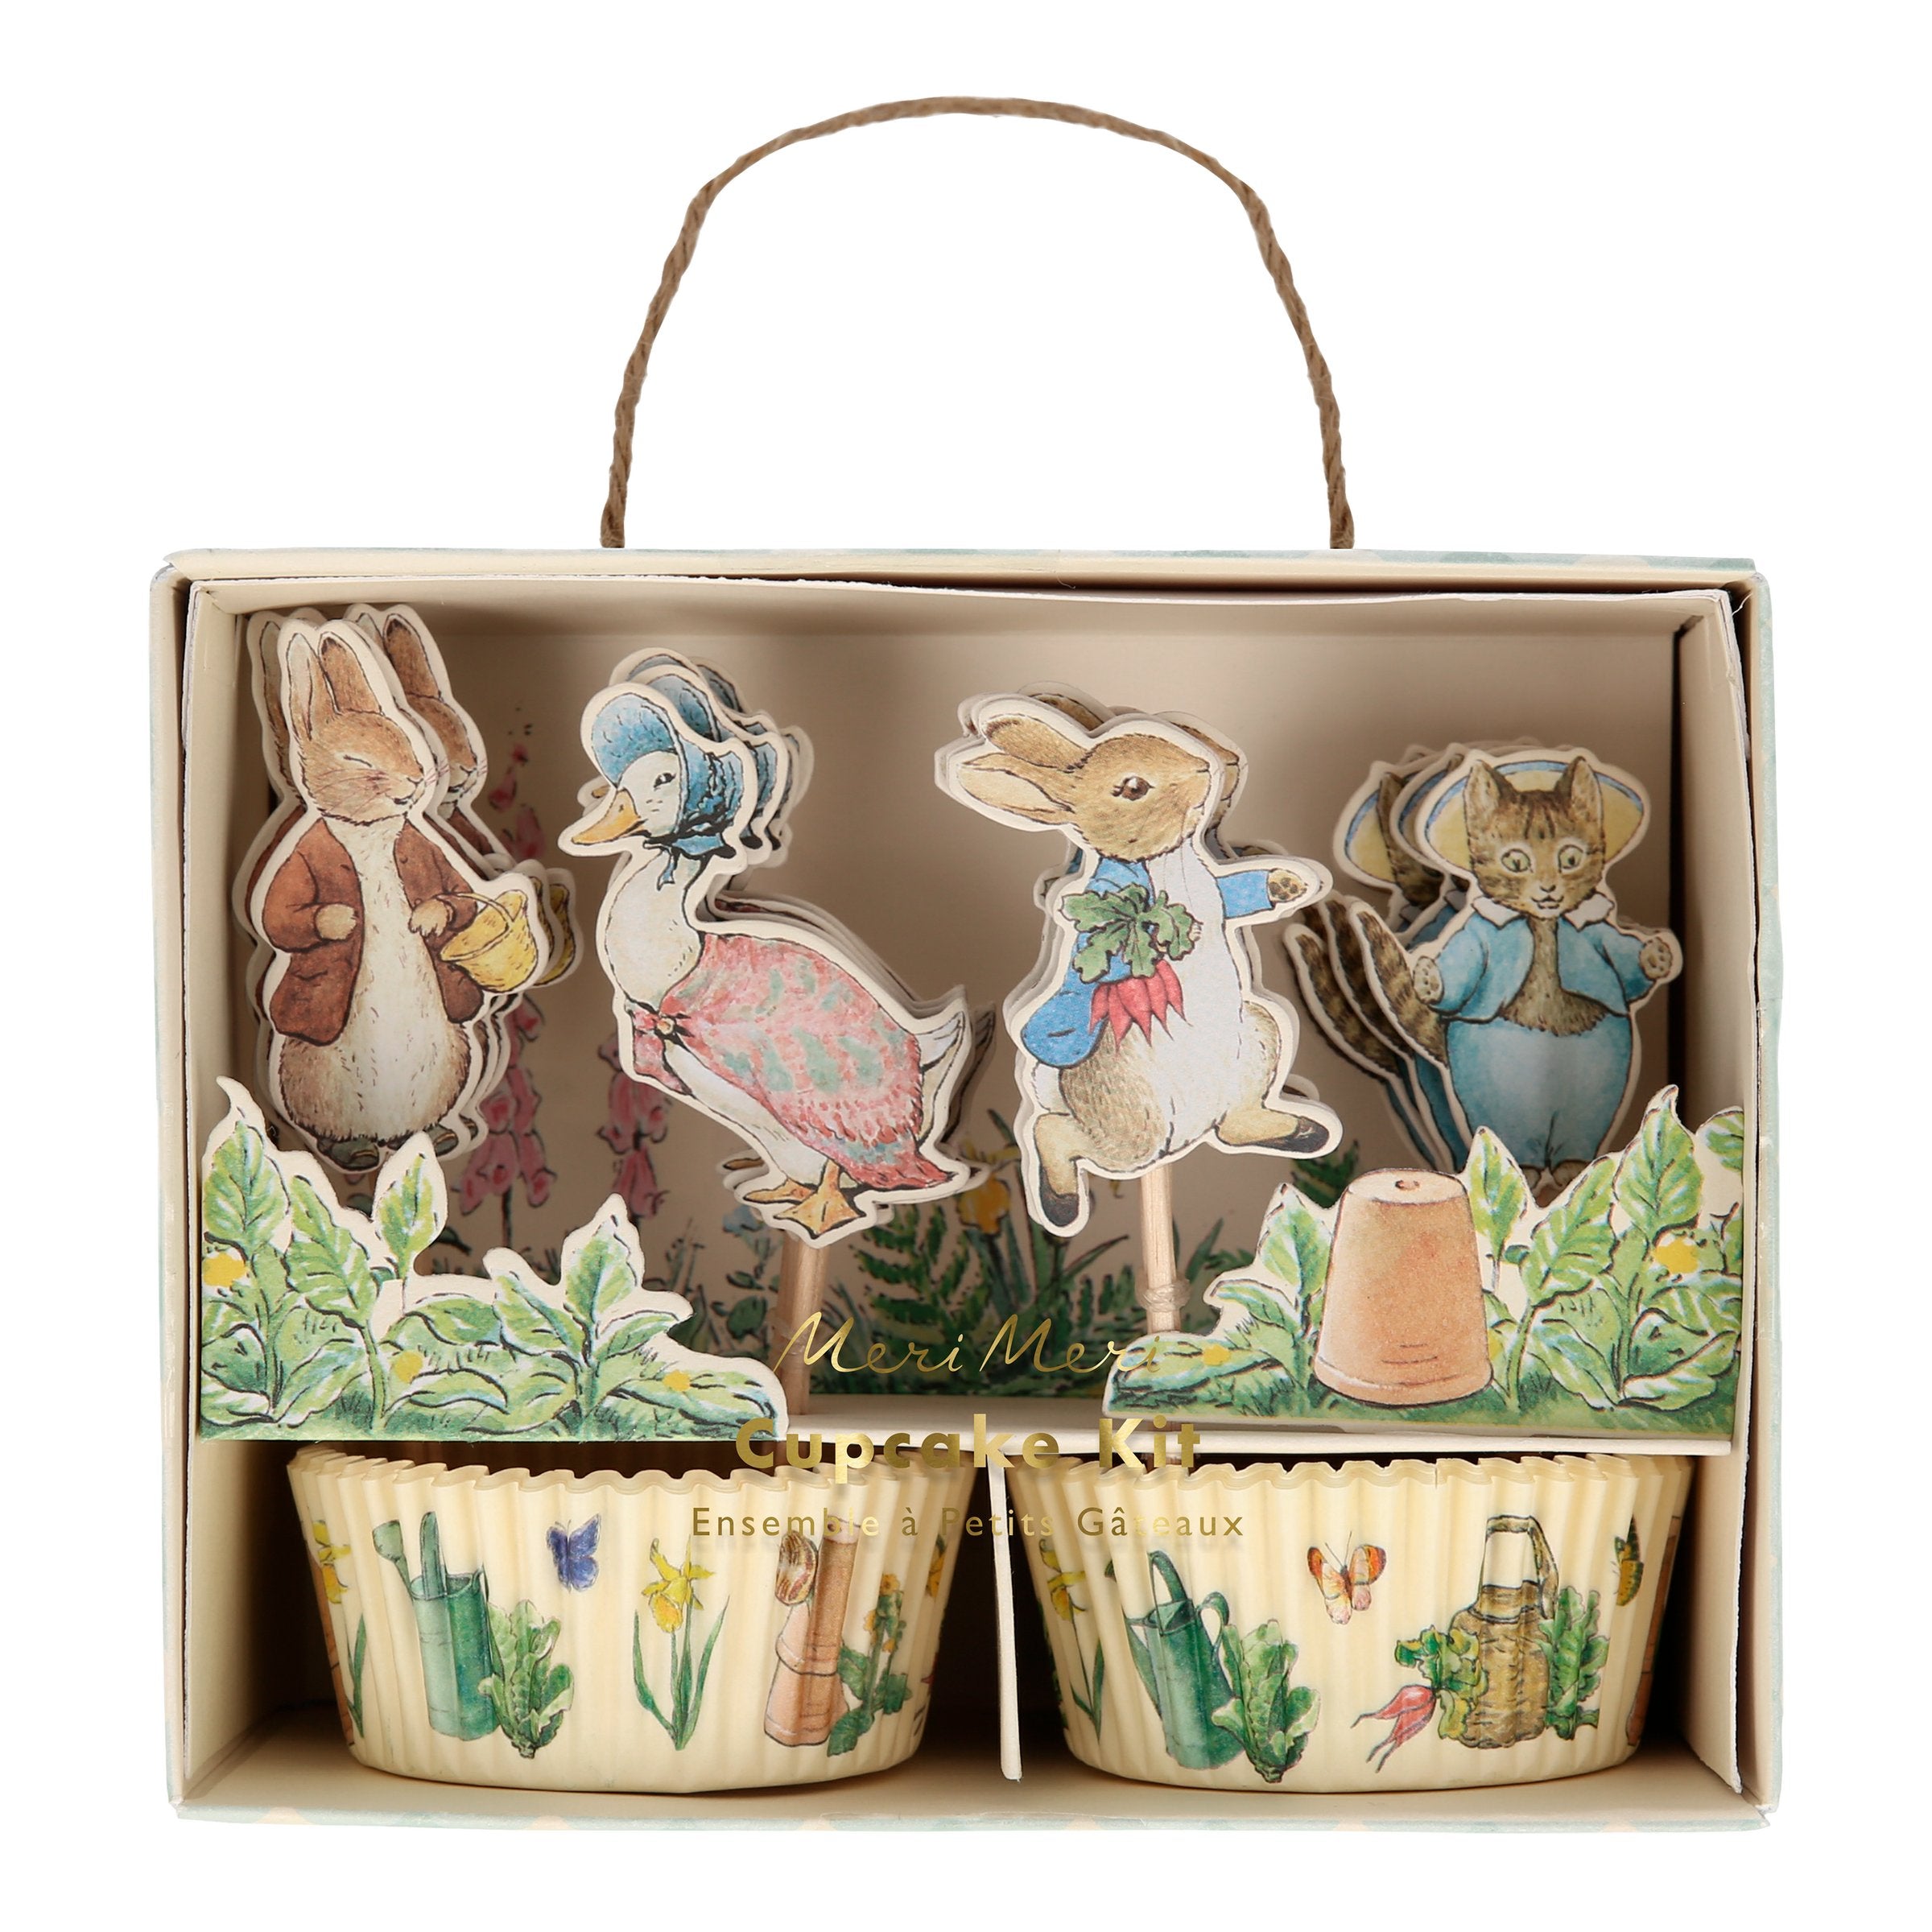 This delightful cupcake kit includes 24 Peter Rabbit characters' toppers with coordinating cupcake cases.